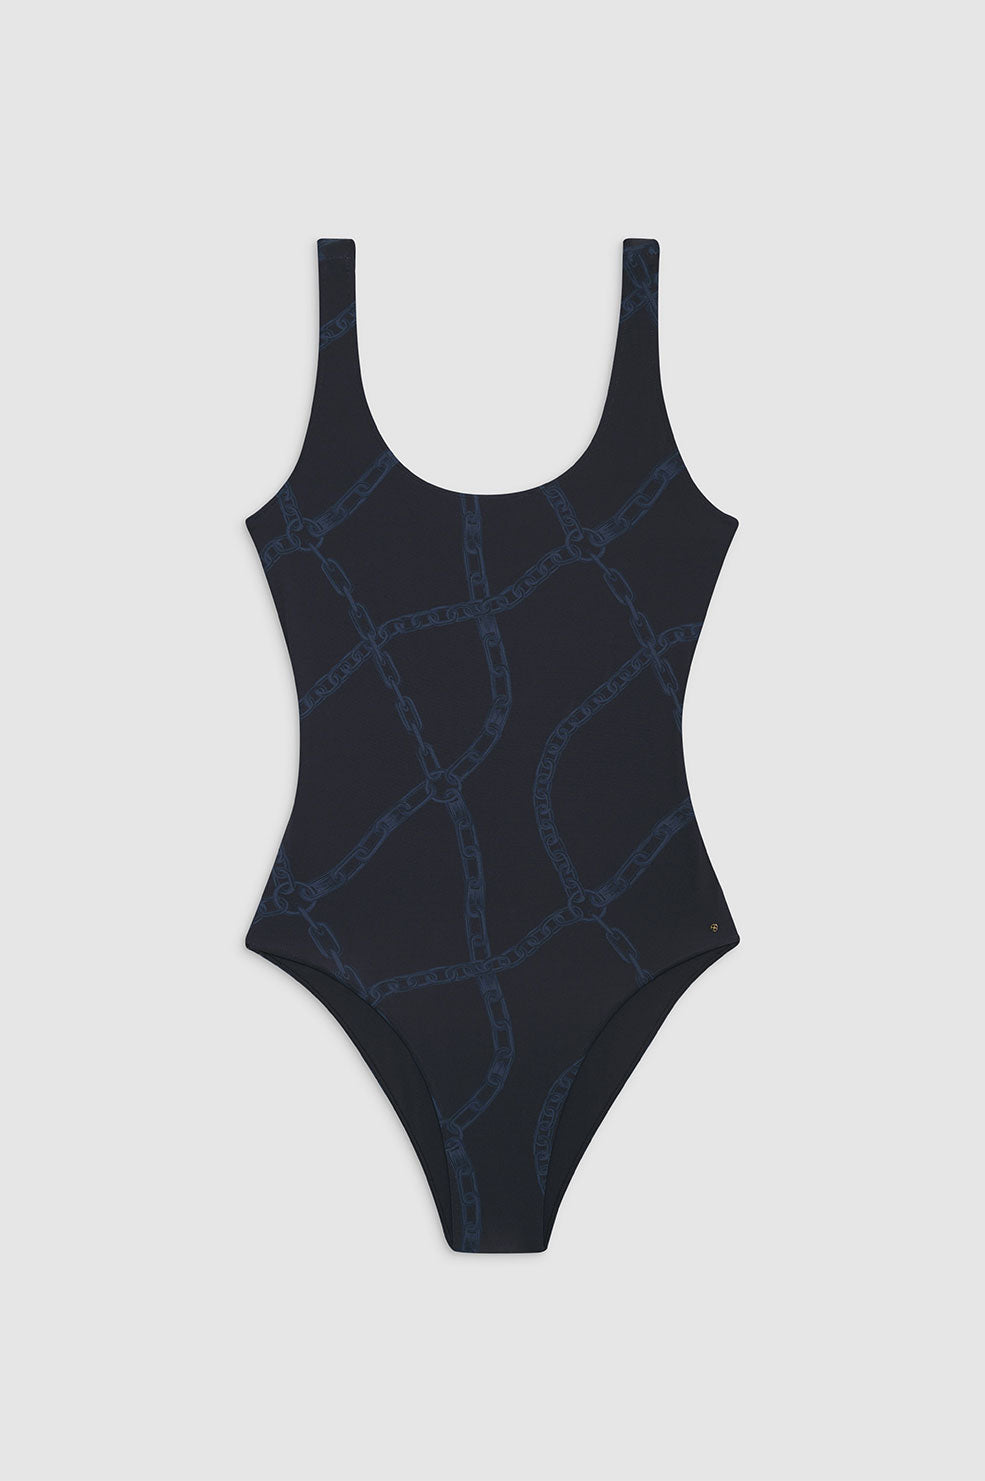 ANINE BING Jace One Piece - Navy Link Print - Front View